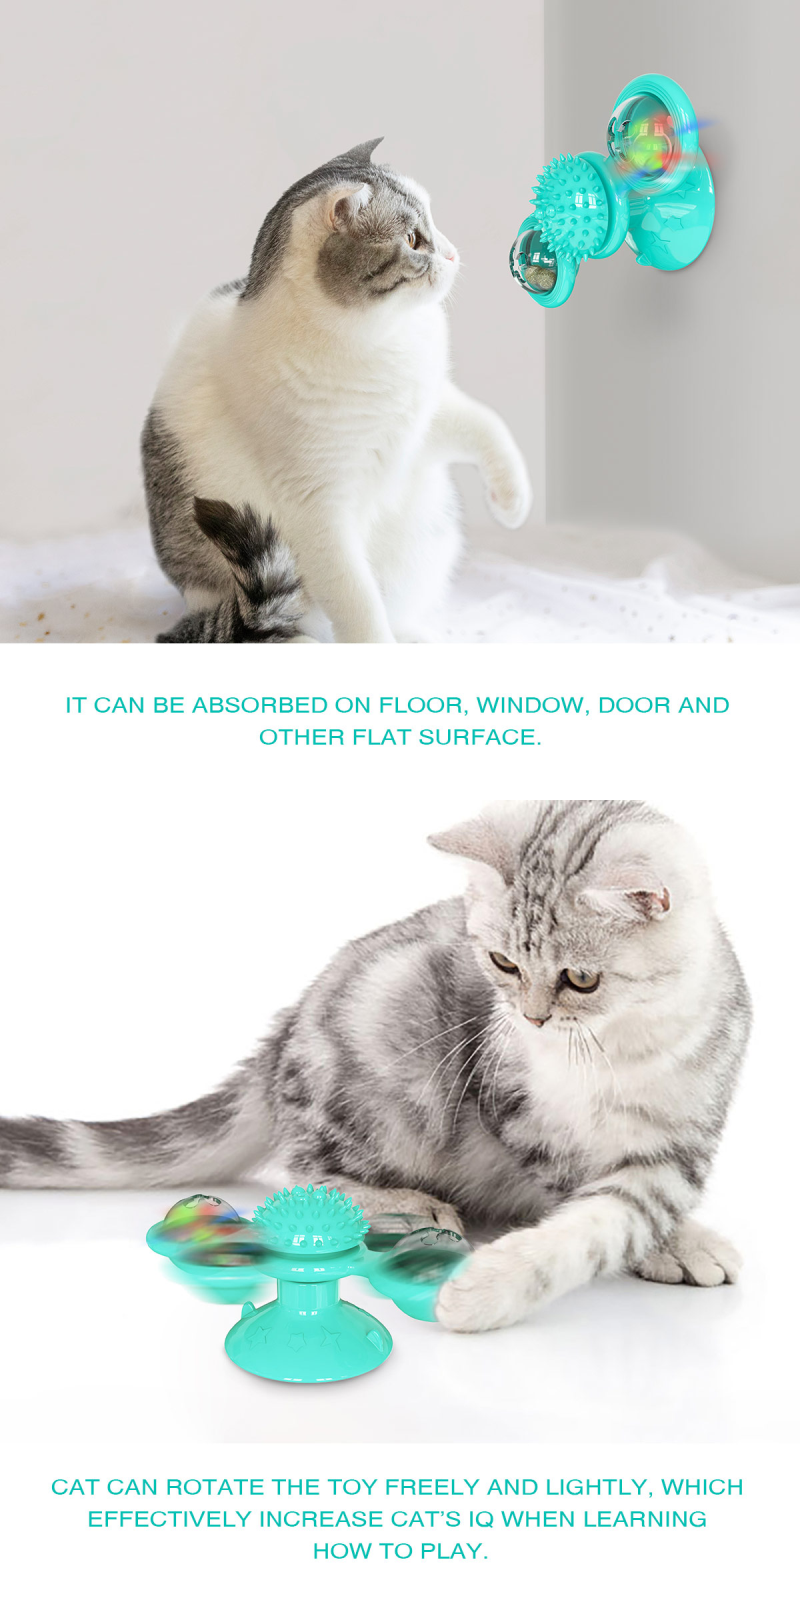 Entice your cat's natural curiosity with our Interactive Windmill Cat Toy! With a rotating windmill and detachable toy, your cat will stay entertained for hours. This interactive toy promotes mental stimulation and physical activity, keeping your furry friend happy and healthy. Upgrade your cat's playtime with our stimulating toy today!